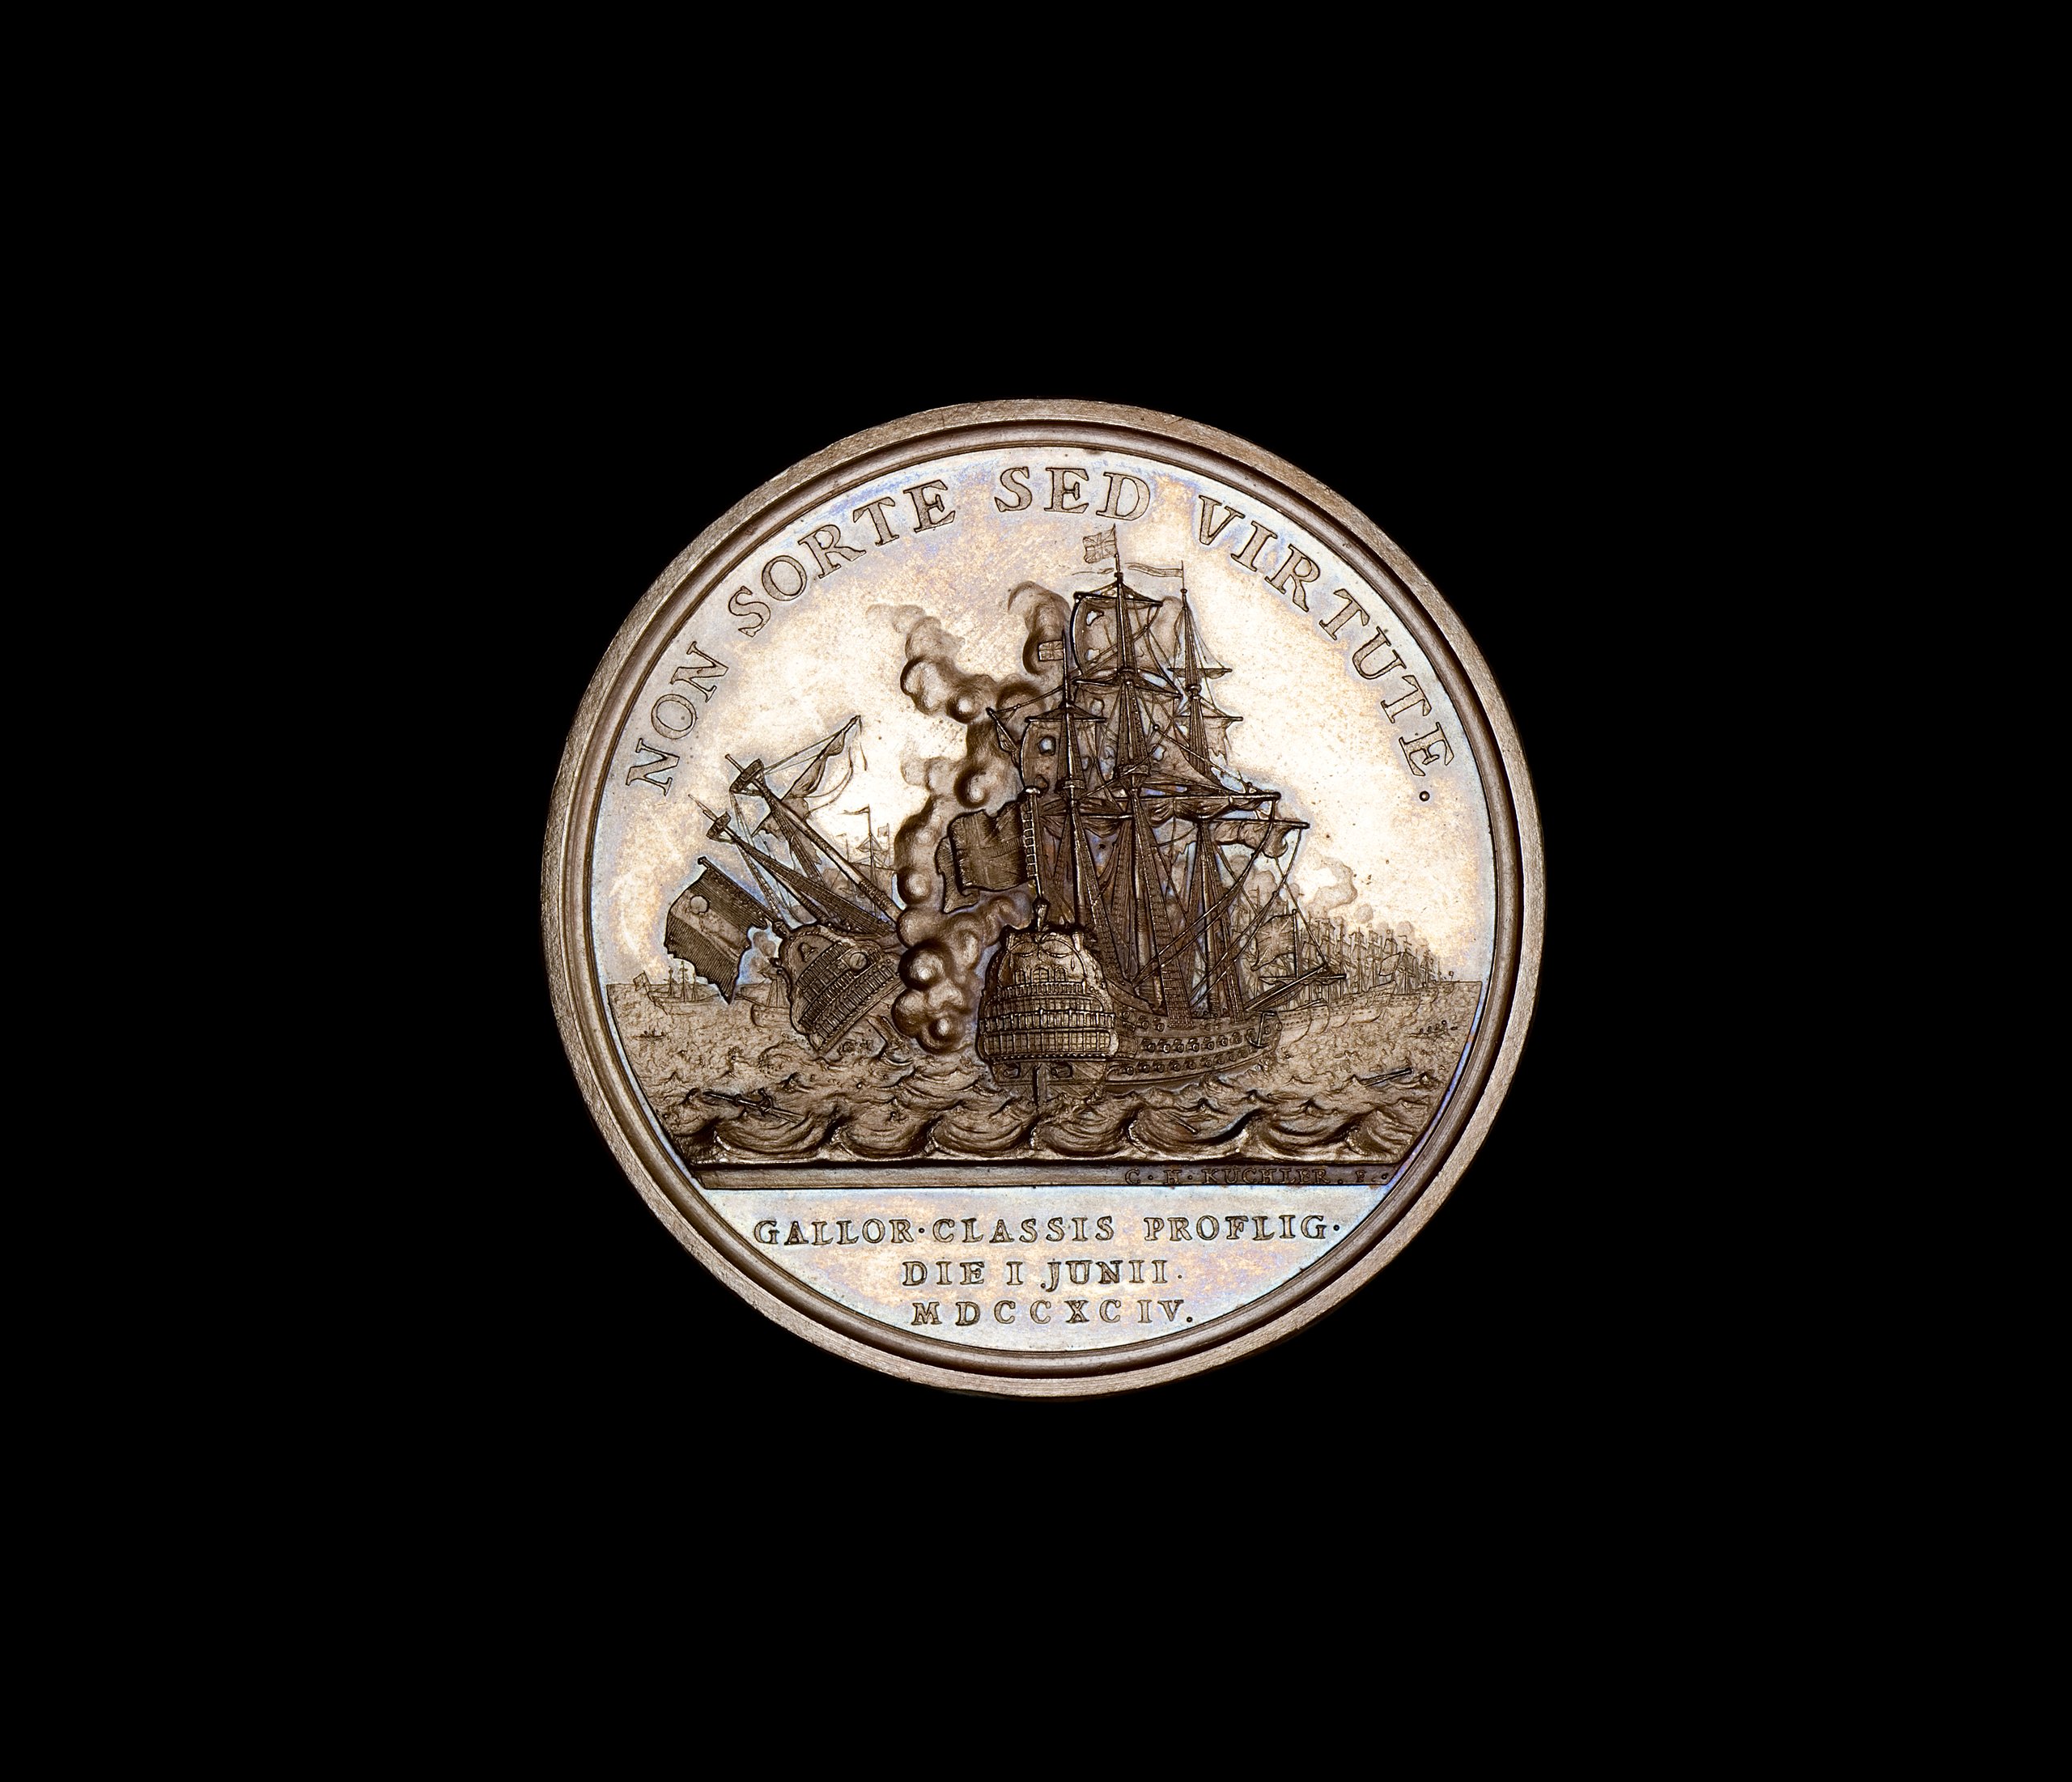 Medal commemorating Admiral Richard Howe and the Battle of the Glorious First of June 1794